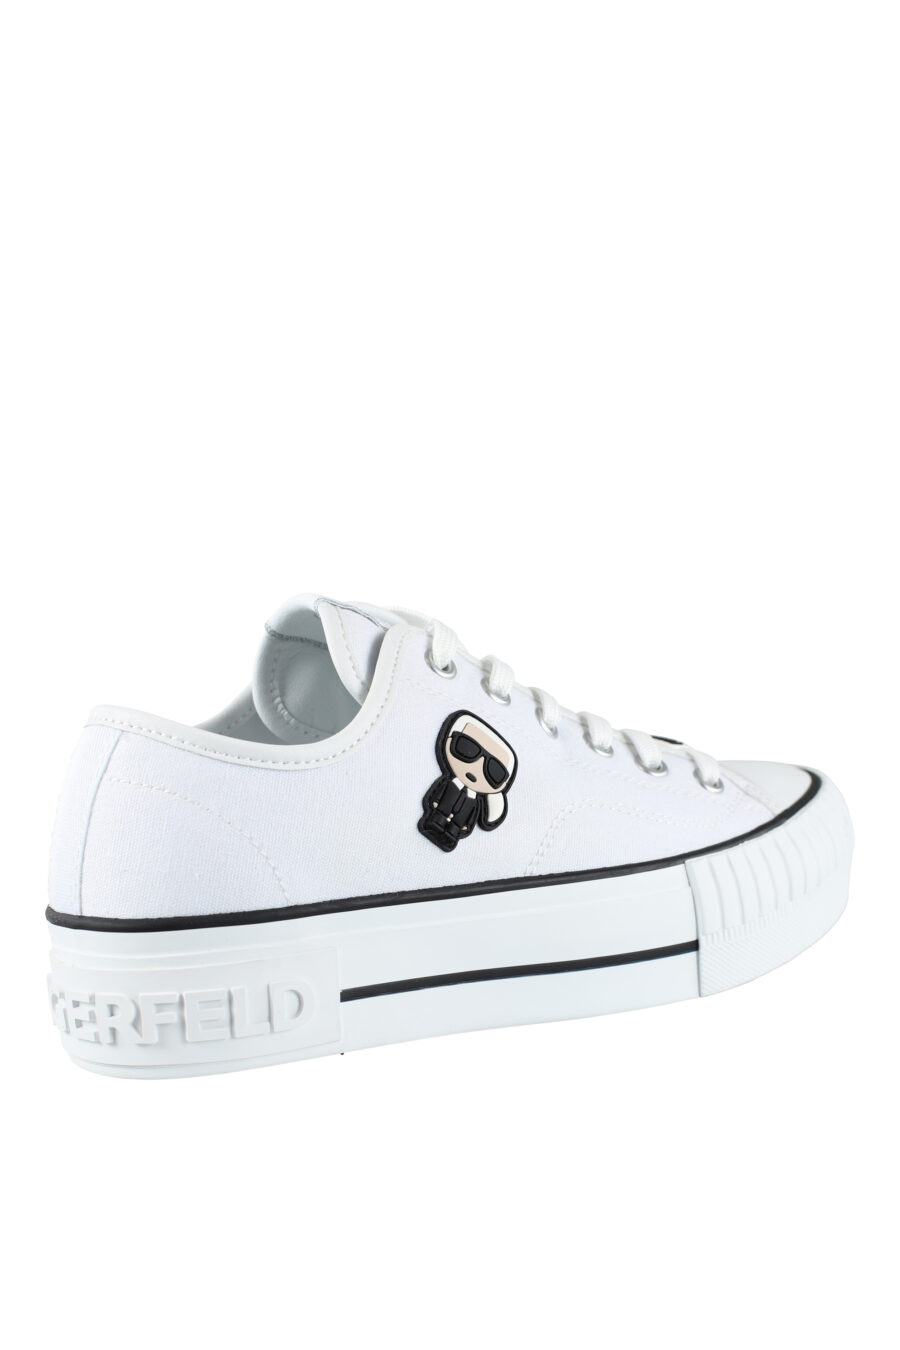 White converse style trainers with rubber "karl" logo - IMG 9563